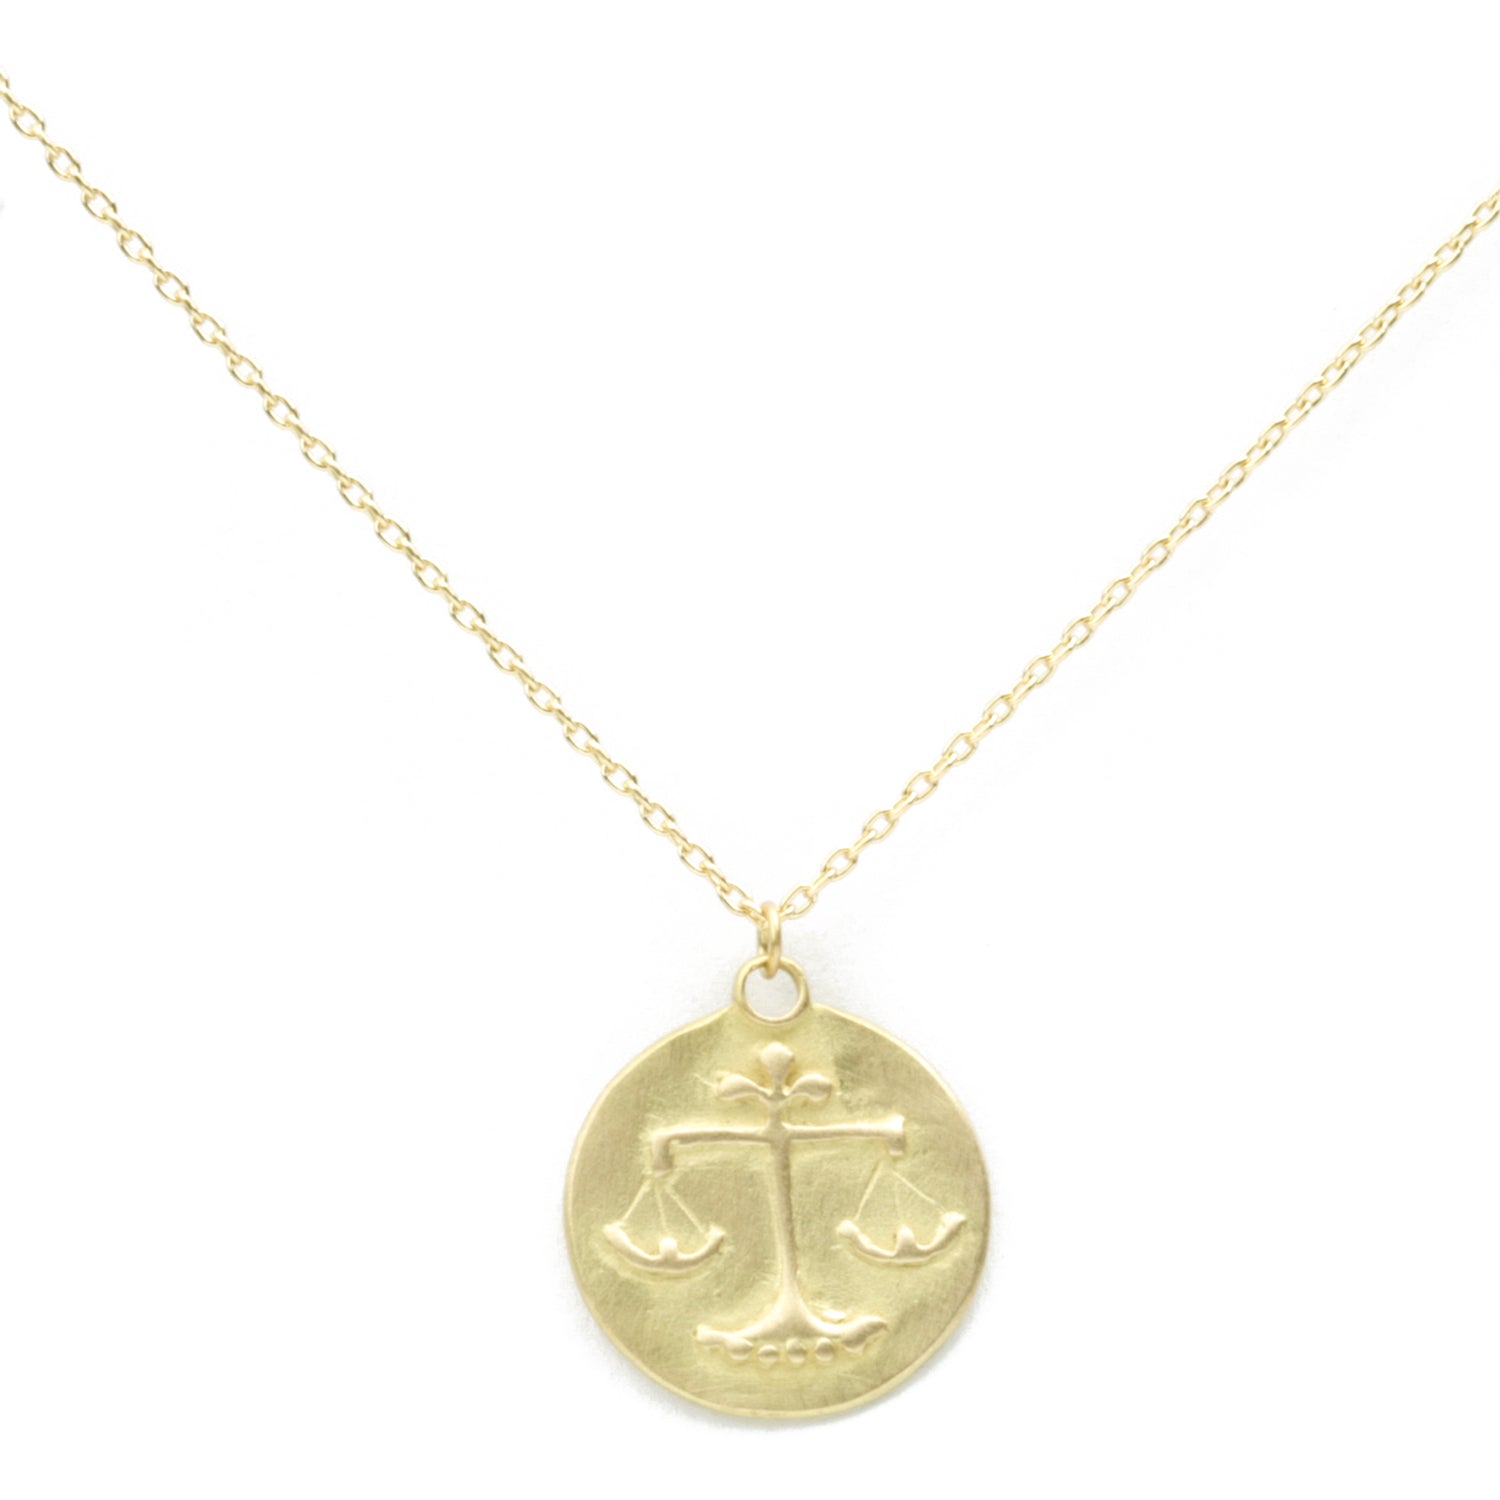 Libra Medal on cable chain